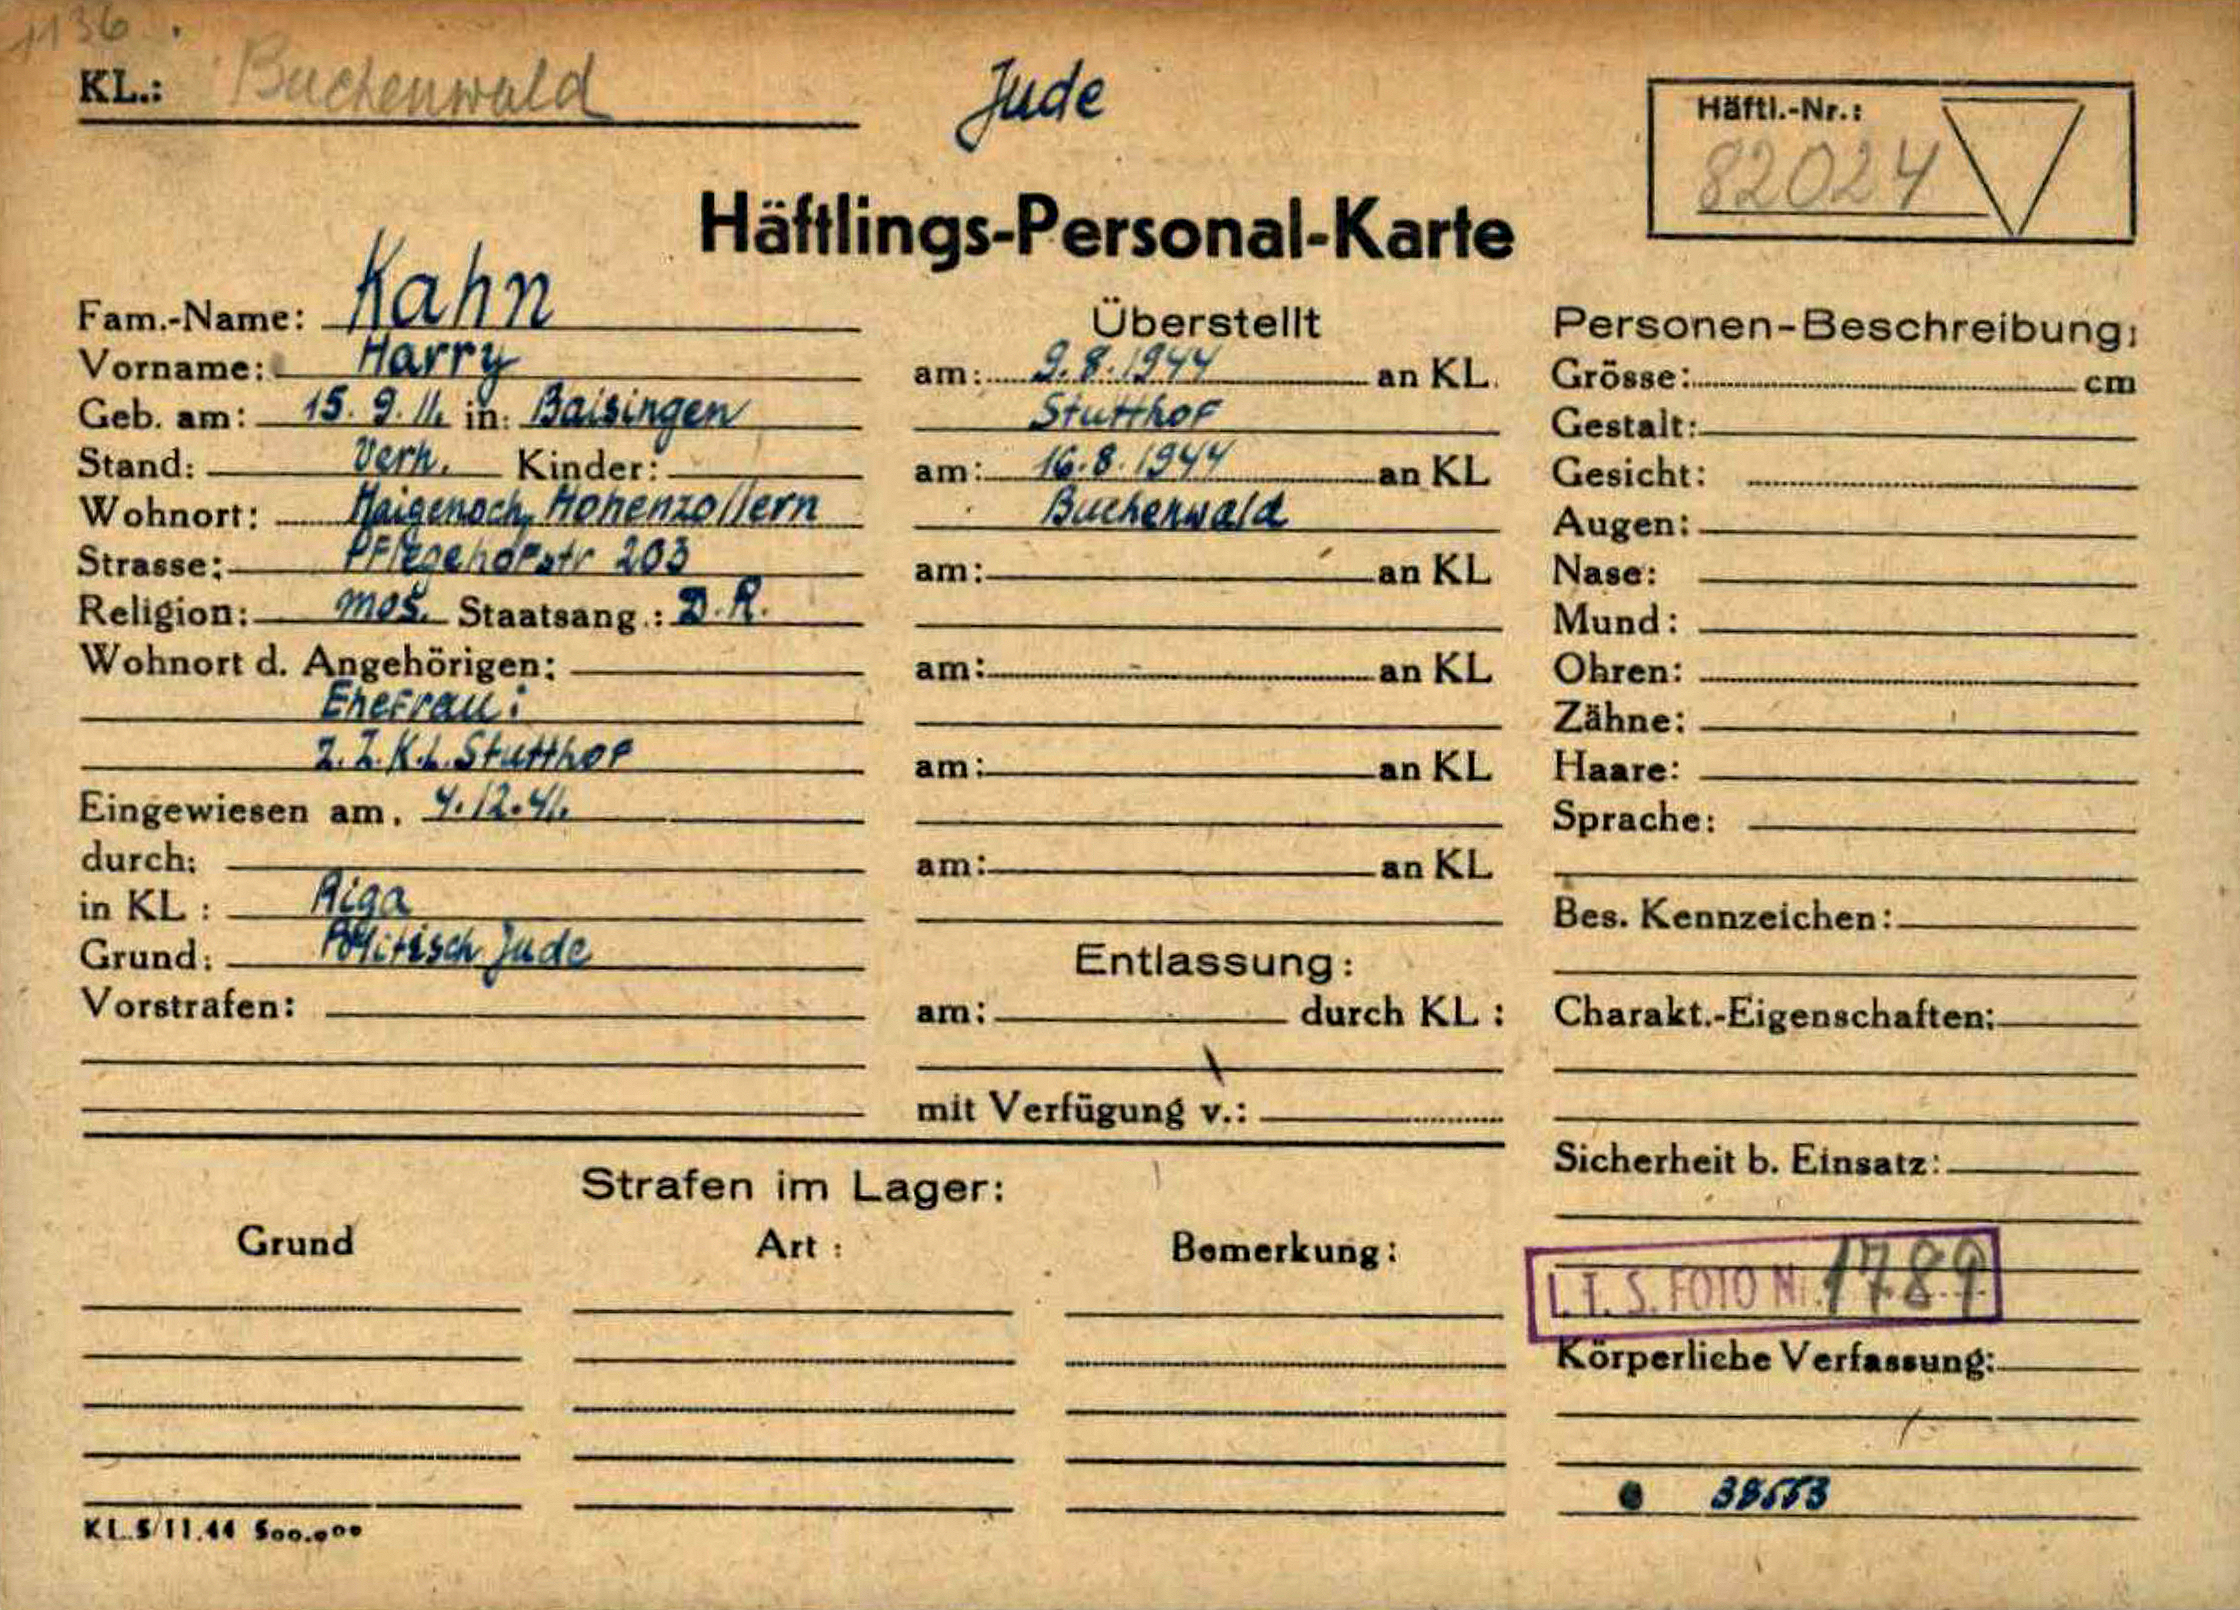 Index card for Harry Kahn in Buchenwald concentration camp